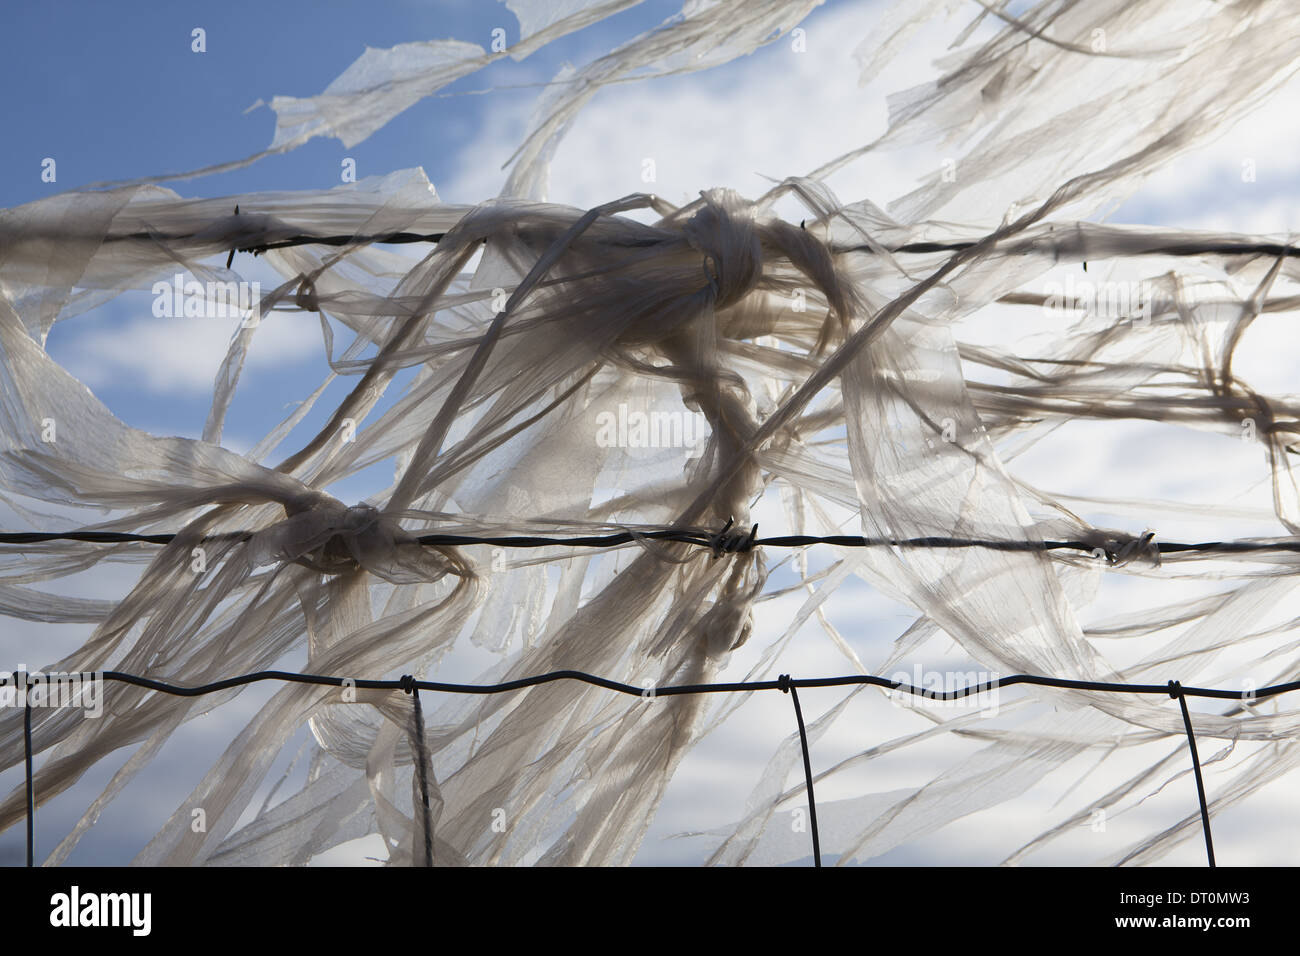 Seattle Washington USA Plastic bags caught on barbed wire fence Stock Photo